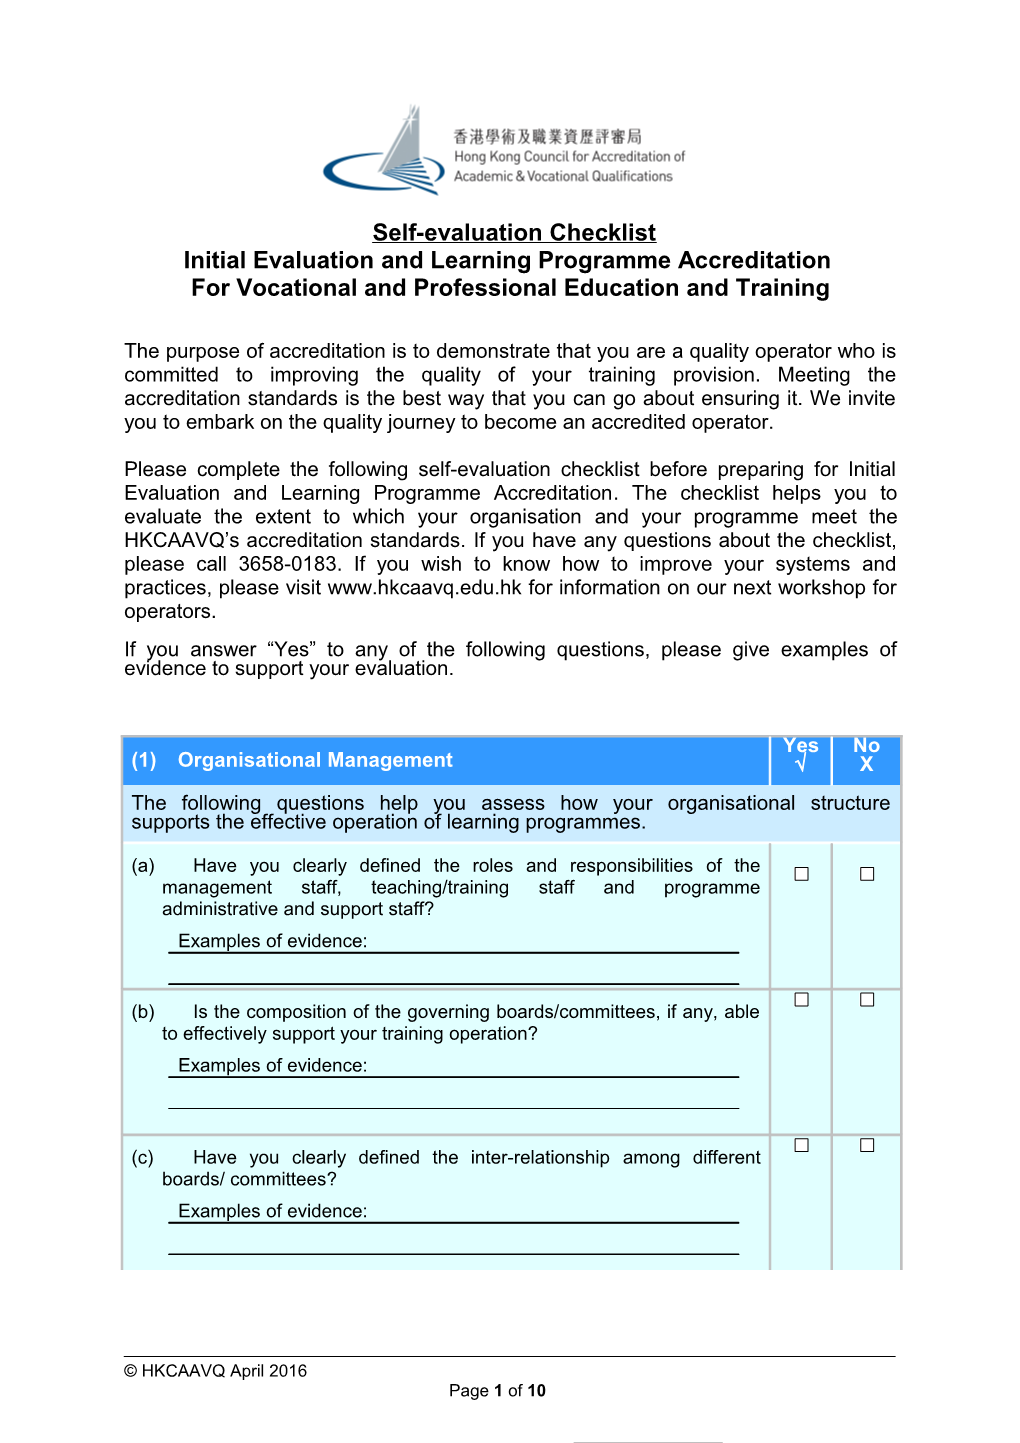 Initial Evaluation and Learning Programme Accreditation